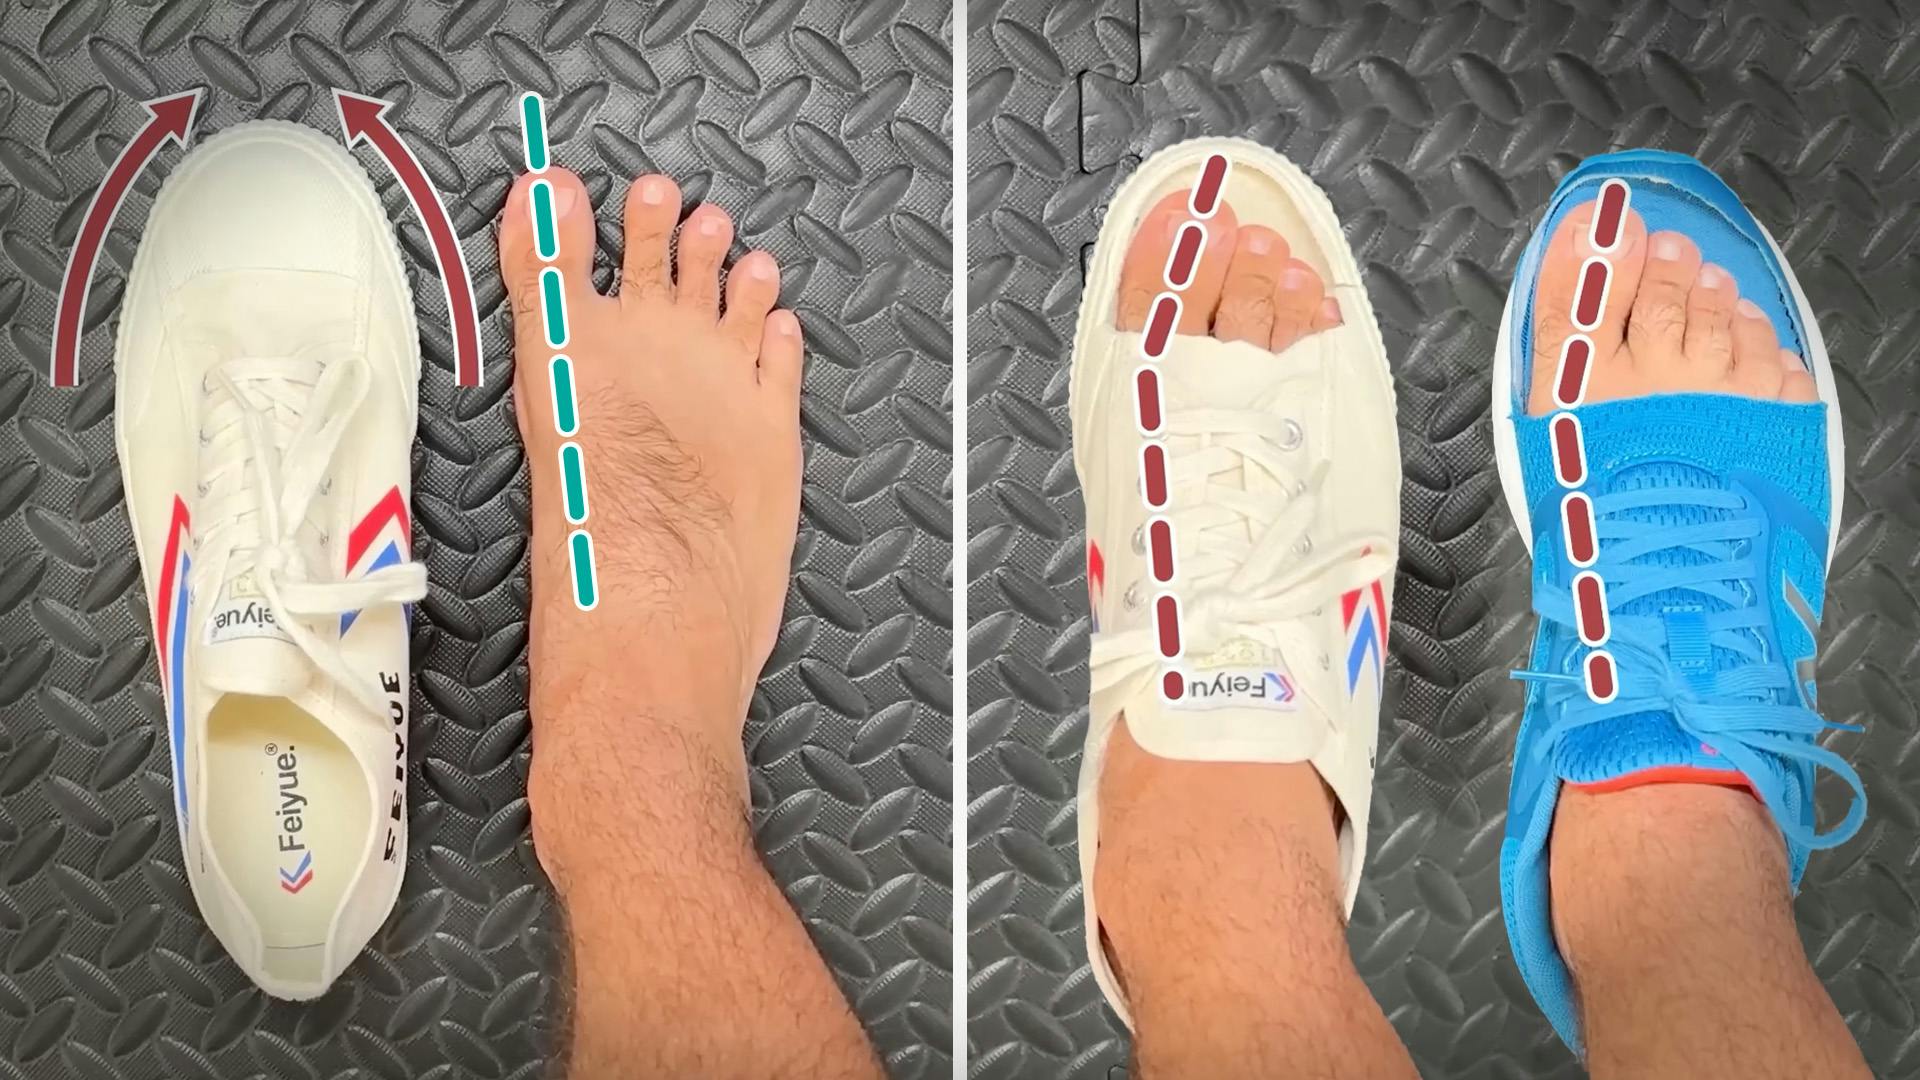 Toe Alignment in Shoes With Narrow Toe Box